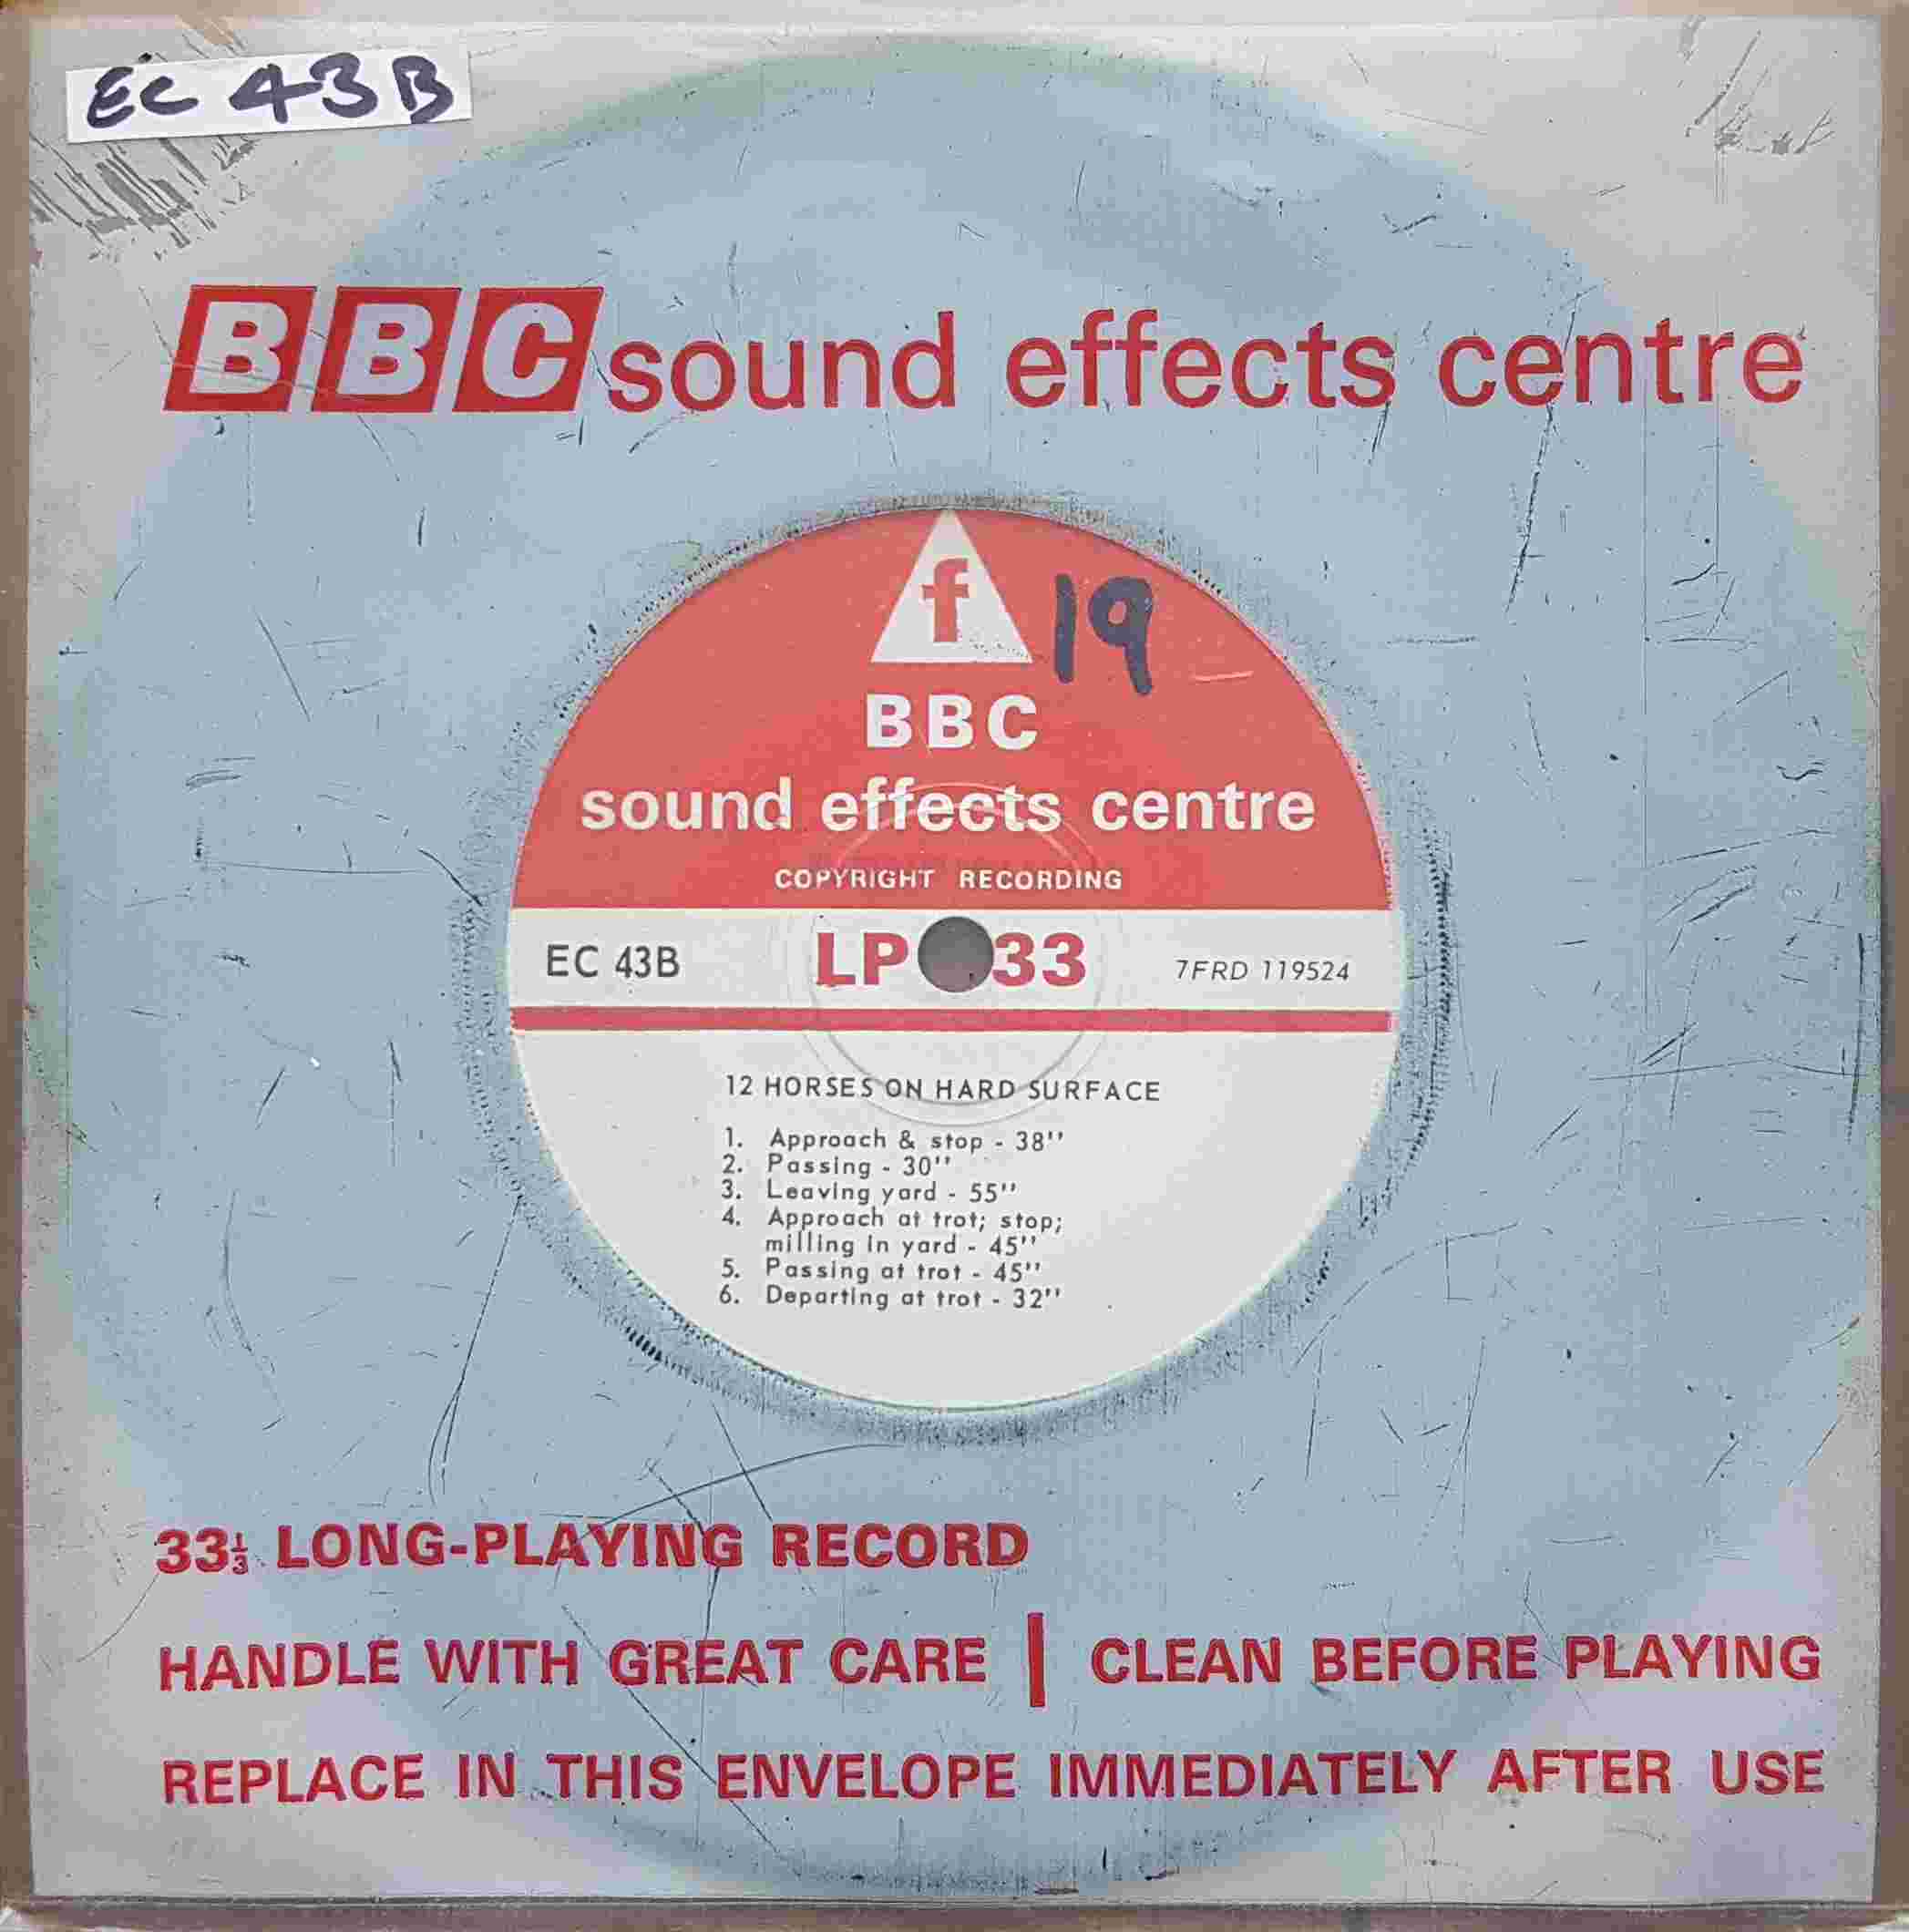 Picture of EC 43B 12 horses on hard surface by artist Not registered from the BBC records and Tapes library